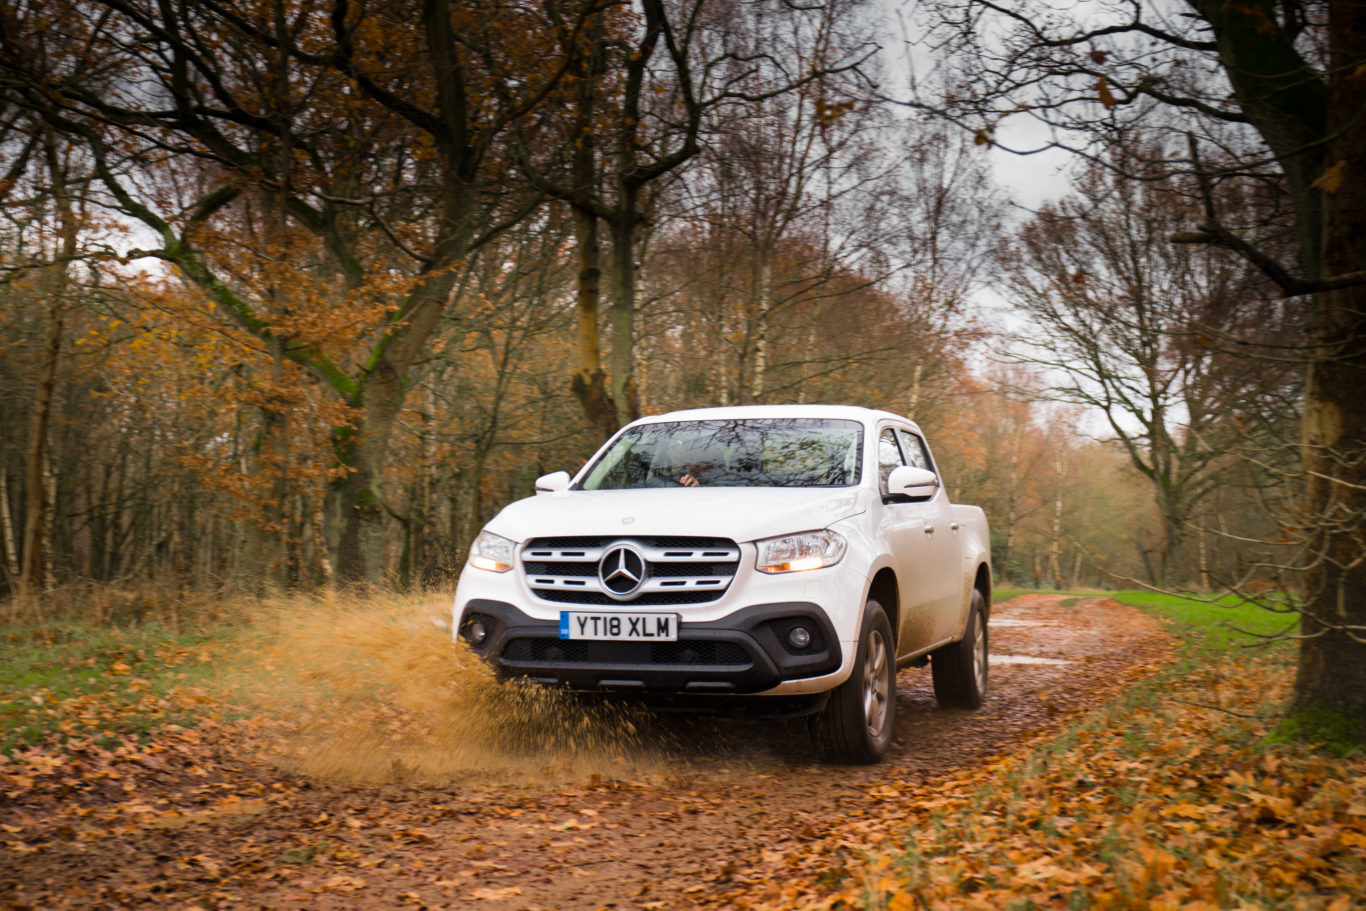 Plenty of ground clearance makes the X-Class formidable off-road